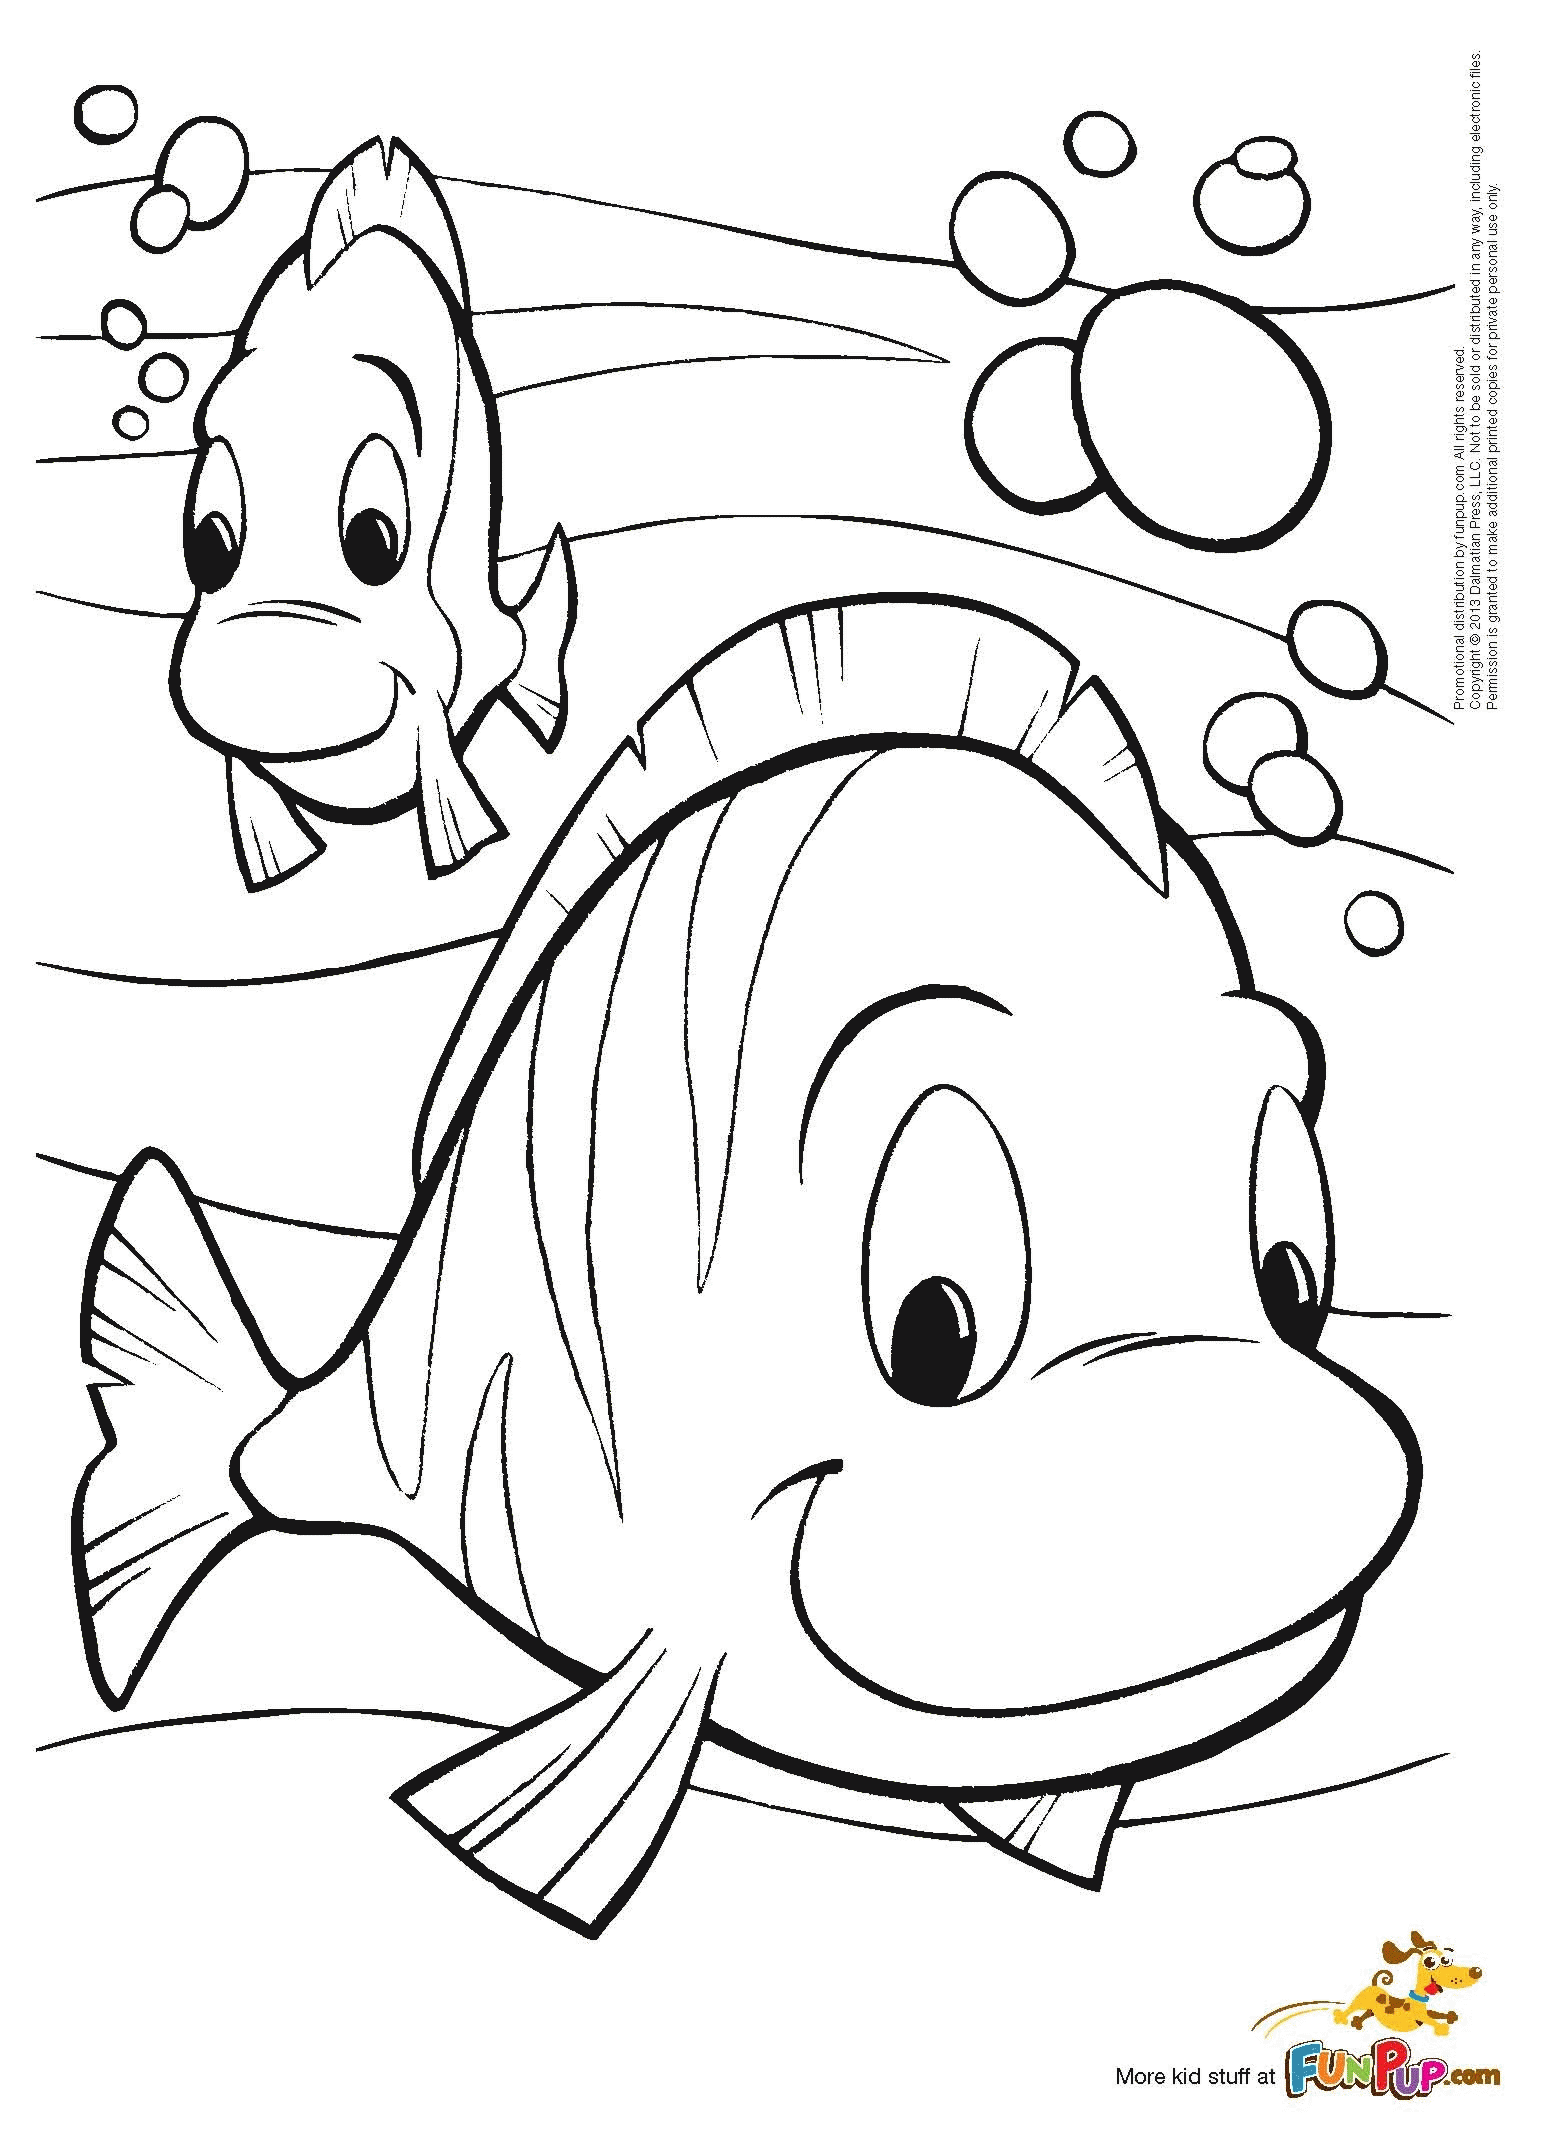 colouring pages for june hello june coloring page twisty noodle june for colouring pages 